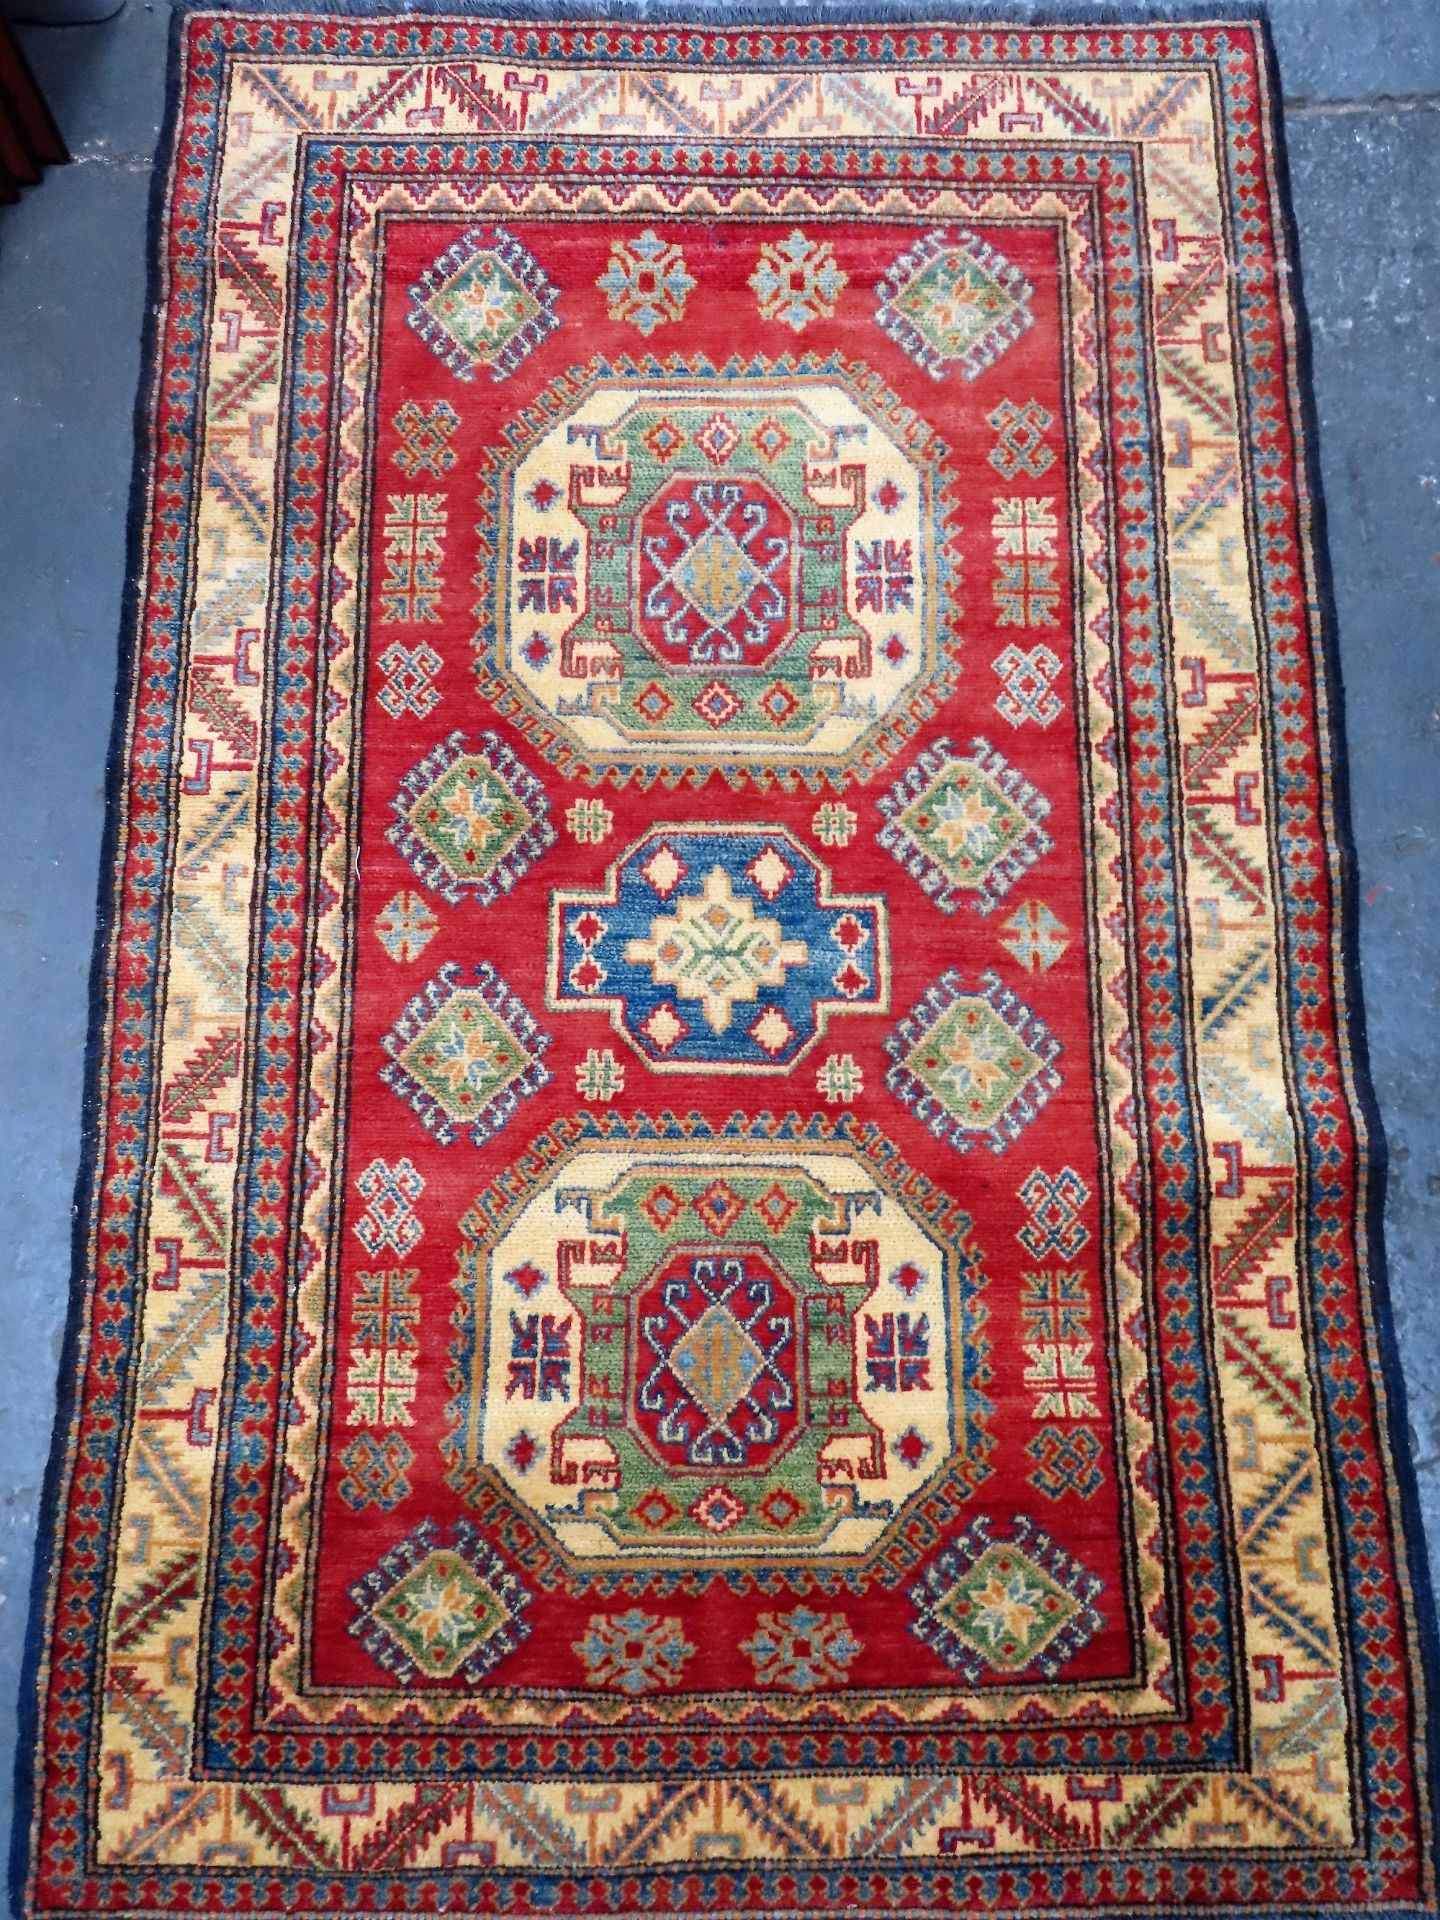 Decorative Middle Eastern style floor rug. Approx. 183cms x 114cms reasonable used condition